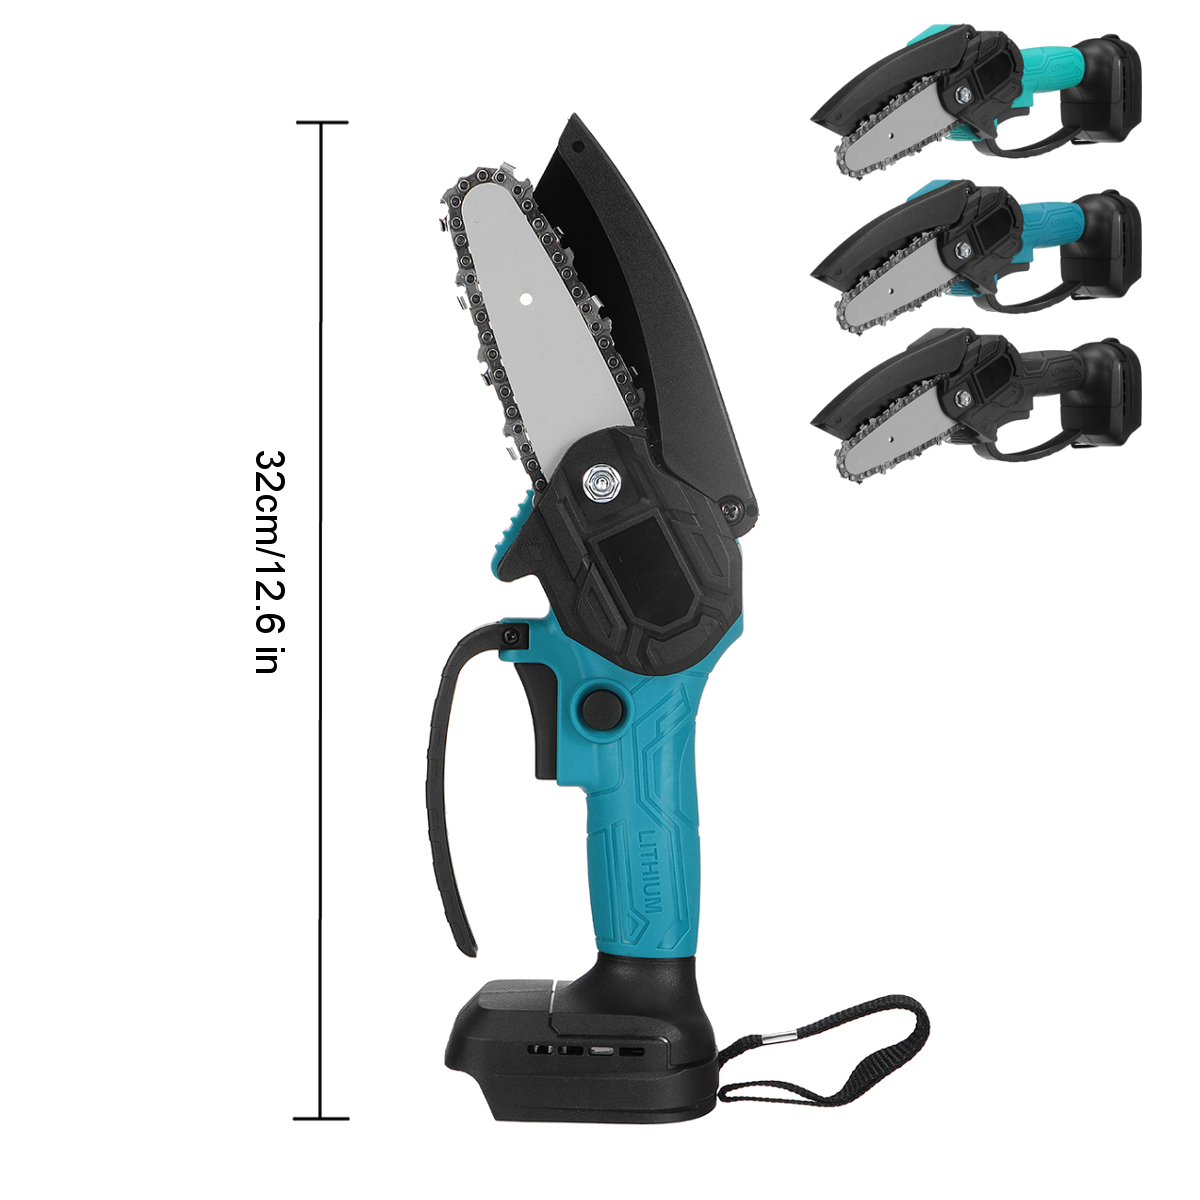 4-Inch-Electric-Chain-Saw-Cordless-Chainsaw-Multi-function-Woodworking-Wood-Cutter-For-Makita-18V-Ba-1861026-11